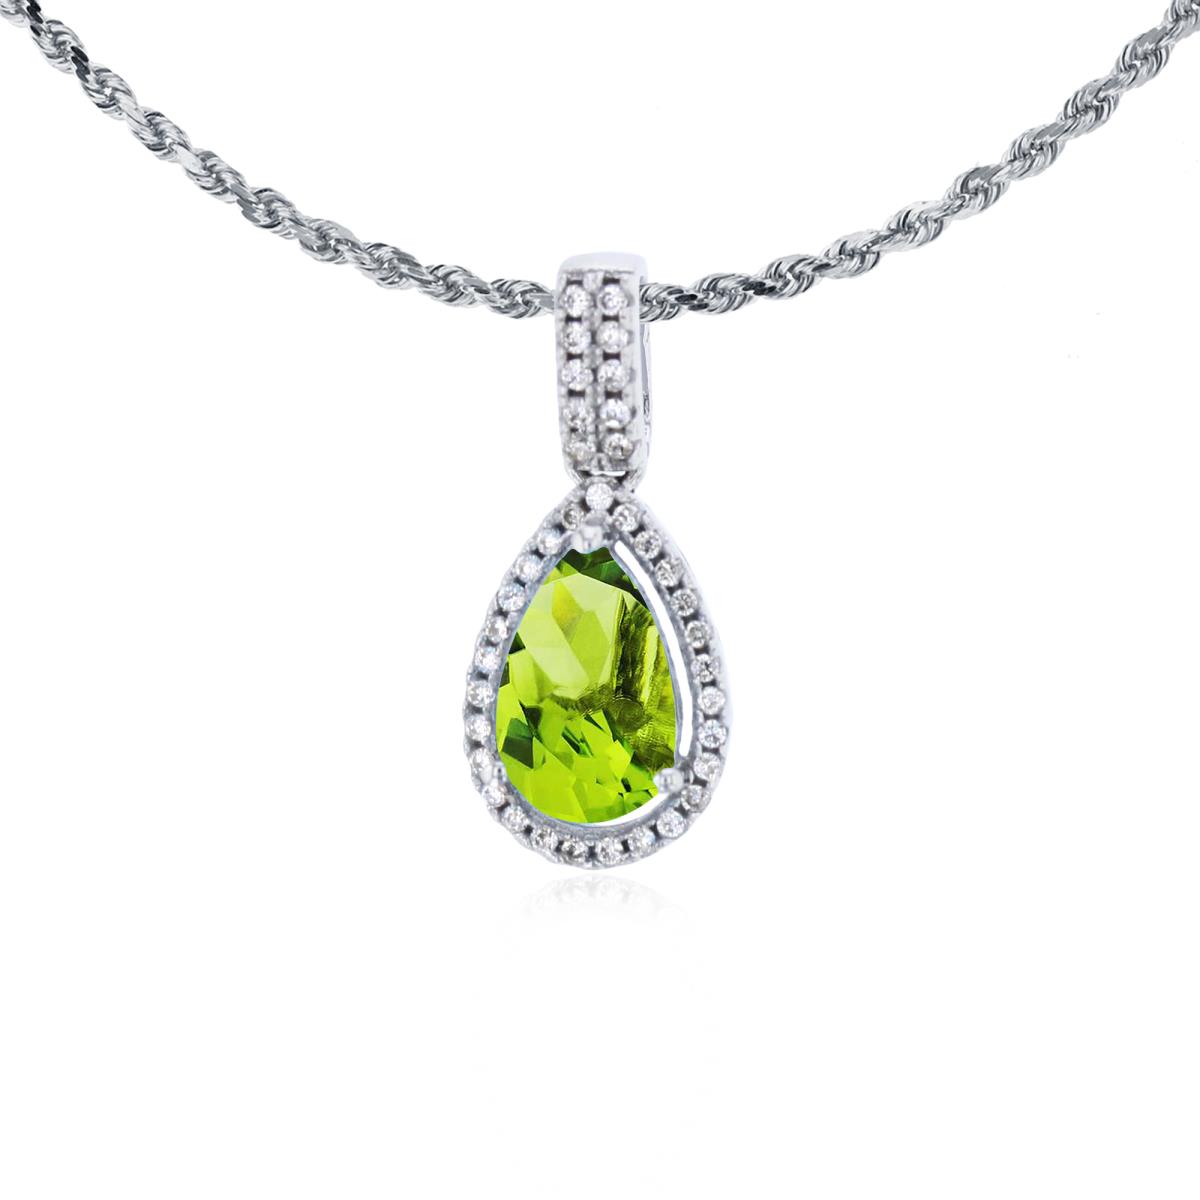 14K White Gold 8x5mm Pear Cut Peridot & 0.11 CTTW Diamond Halo 18" Rope Chain Necklace